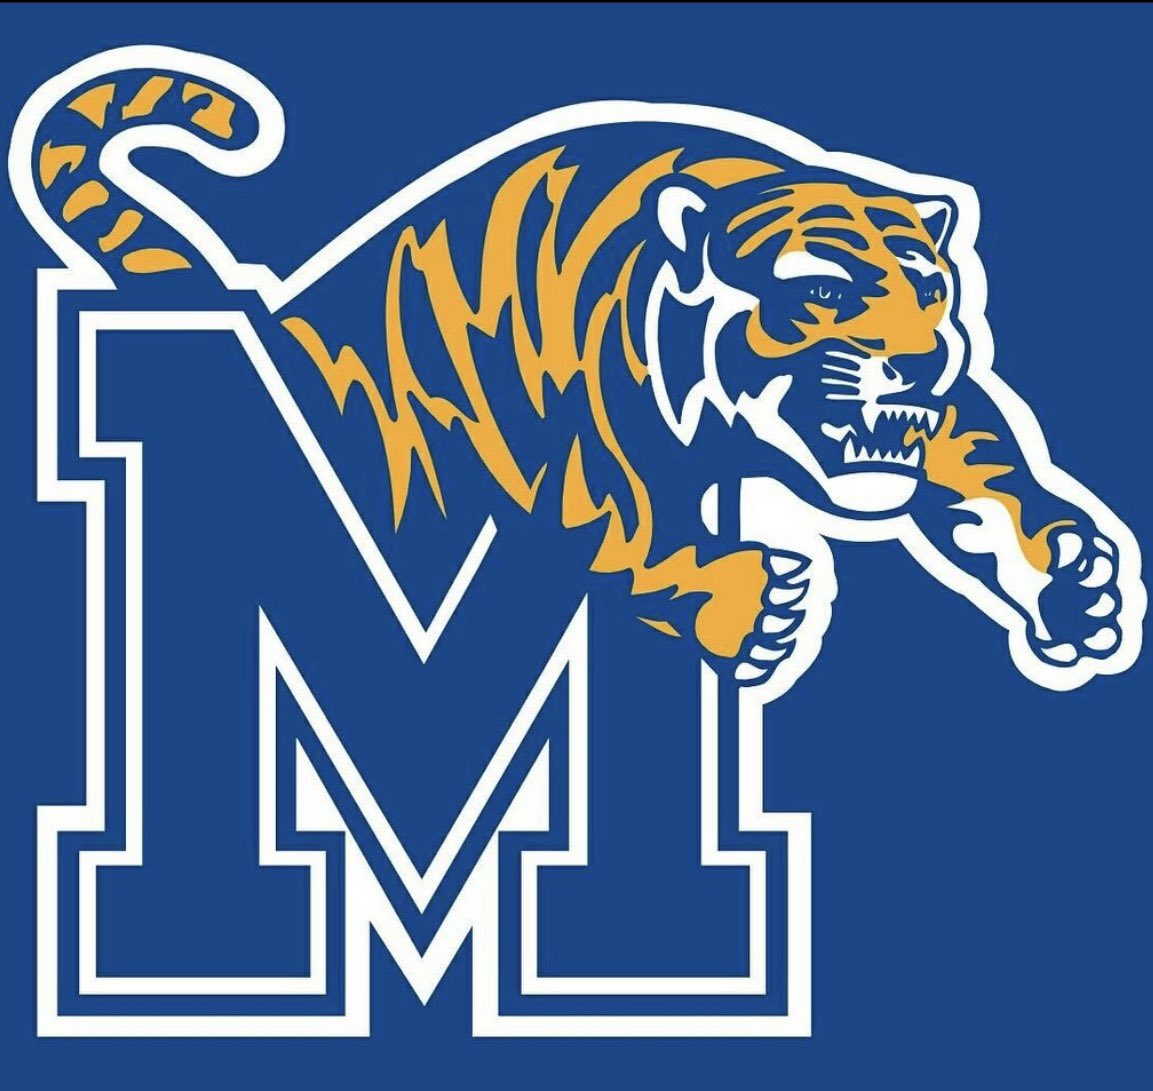 Blessed to receive another offer from Memphis‼️#4theG #tigers @reggiehoward @coach_them_up1 @RamsFBrecruits @grayson_fb @JeremyO_Johnson @ChadSimmons_ @adamgorney @SWiltfong_ @JohnGarcia_Jr